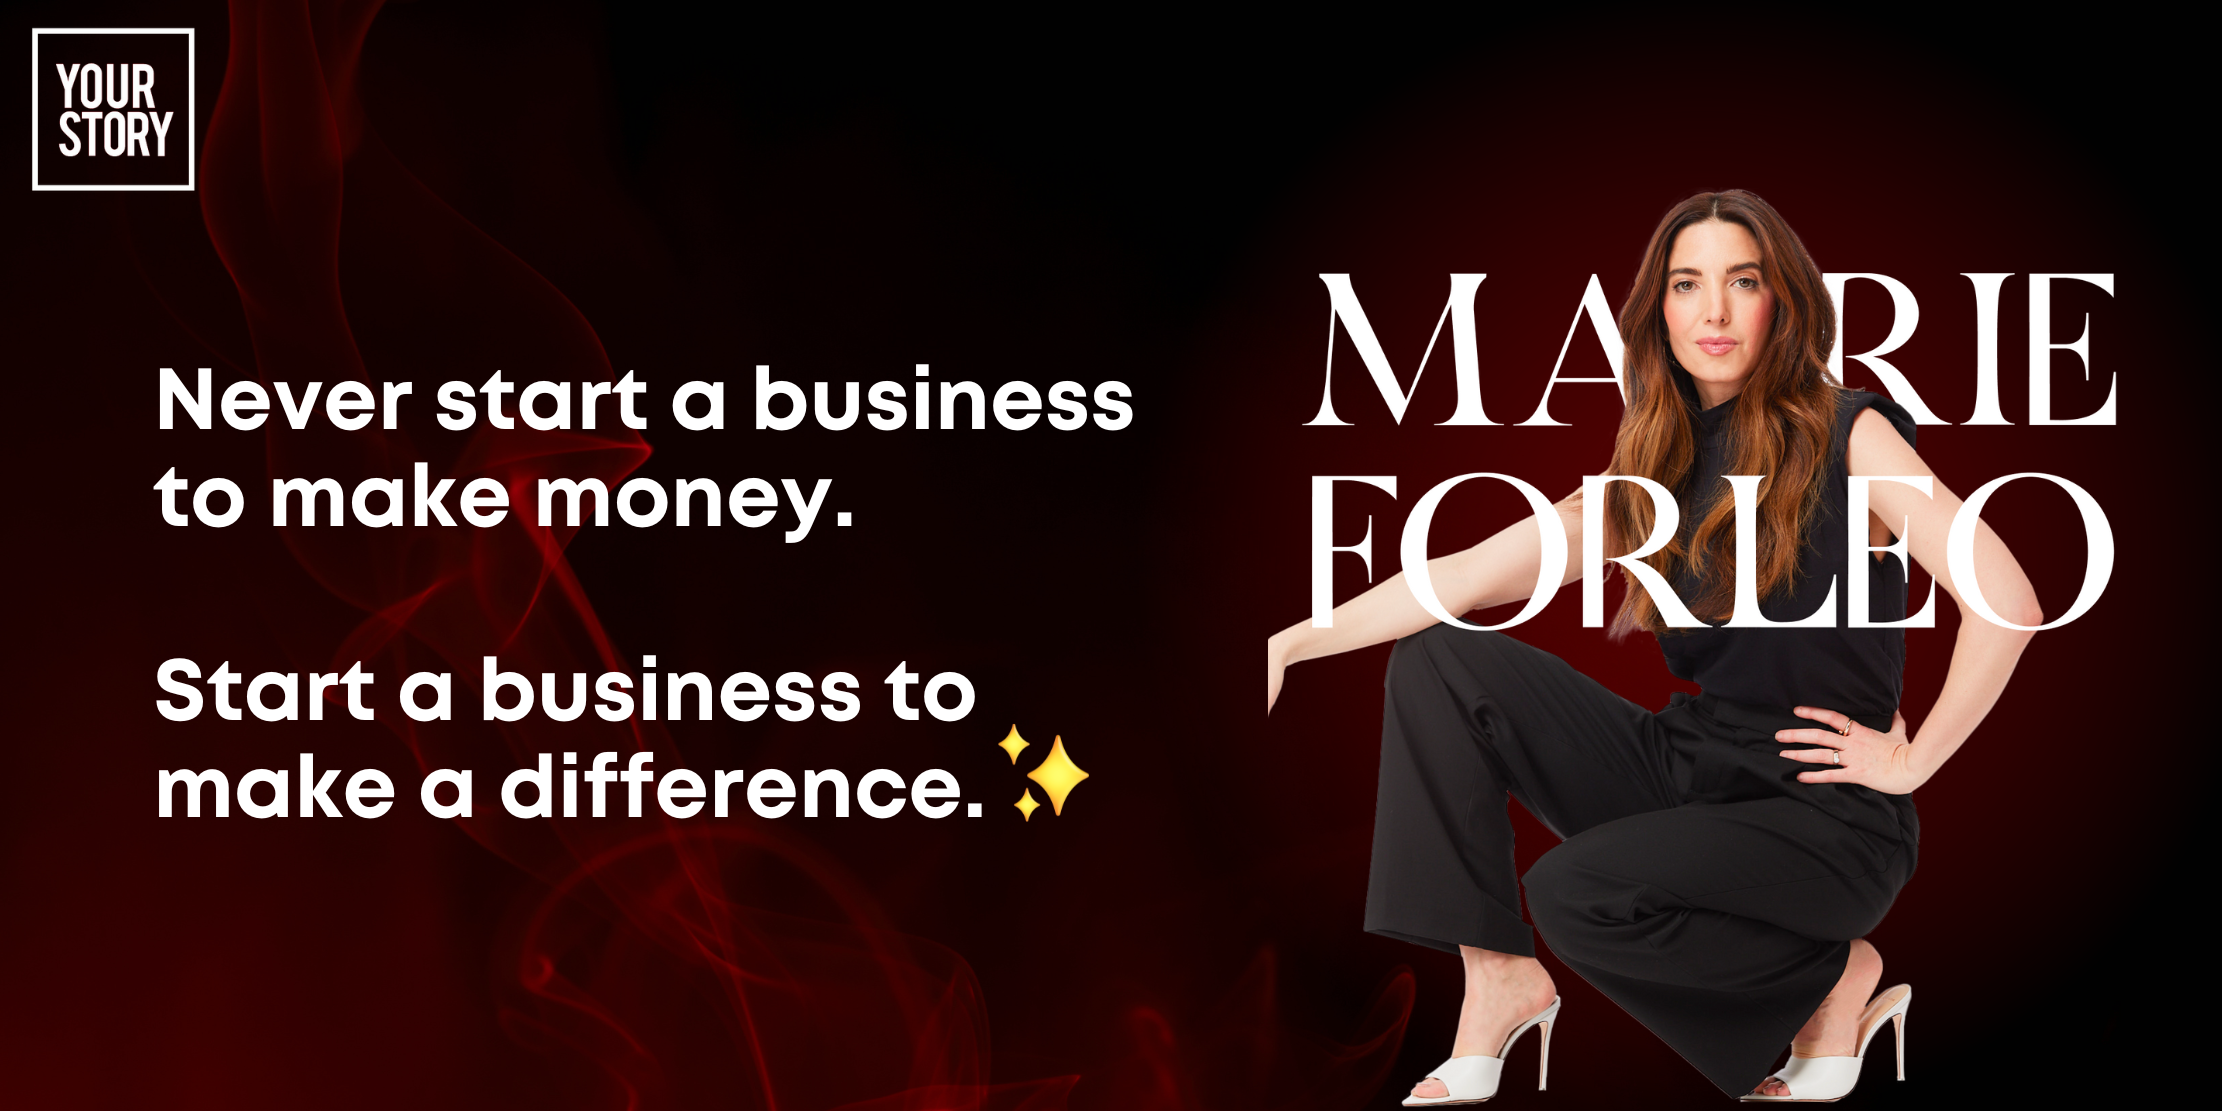 Never start a business to make money. Start a business to make a difference.